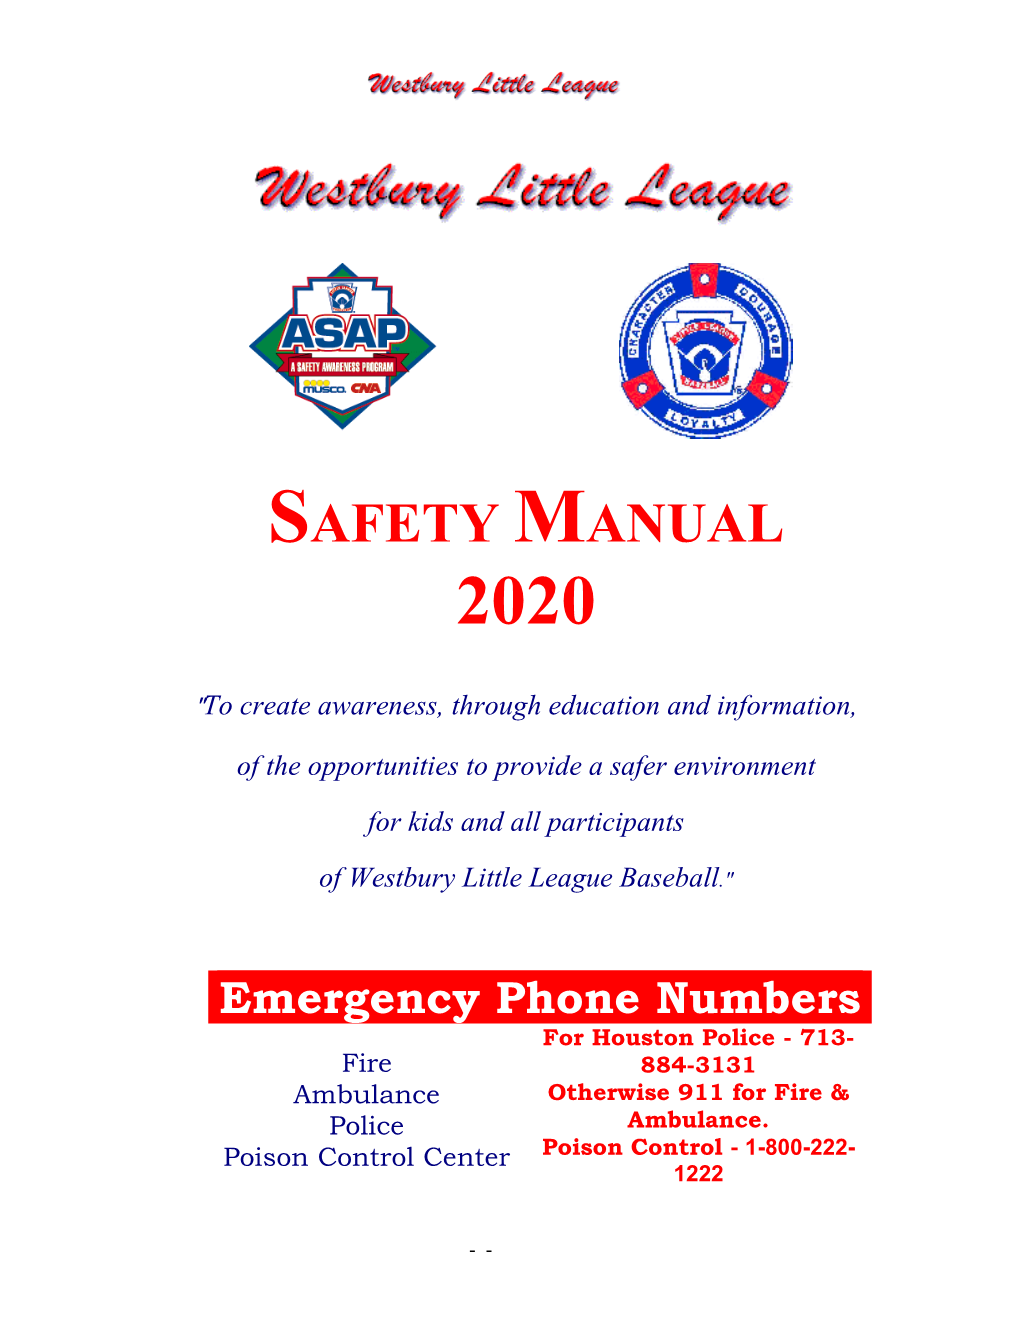 Safety Manual 2020